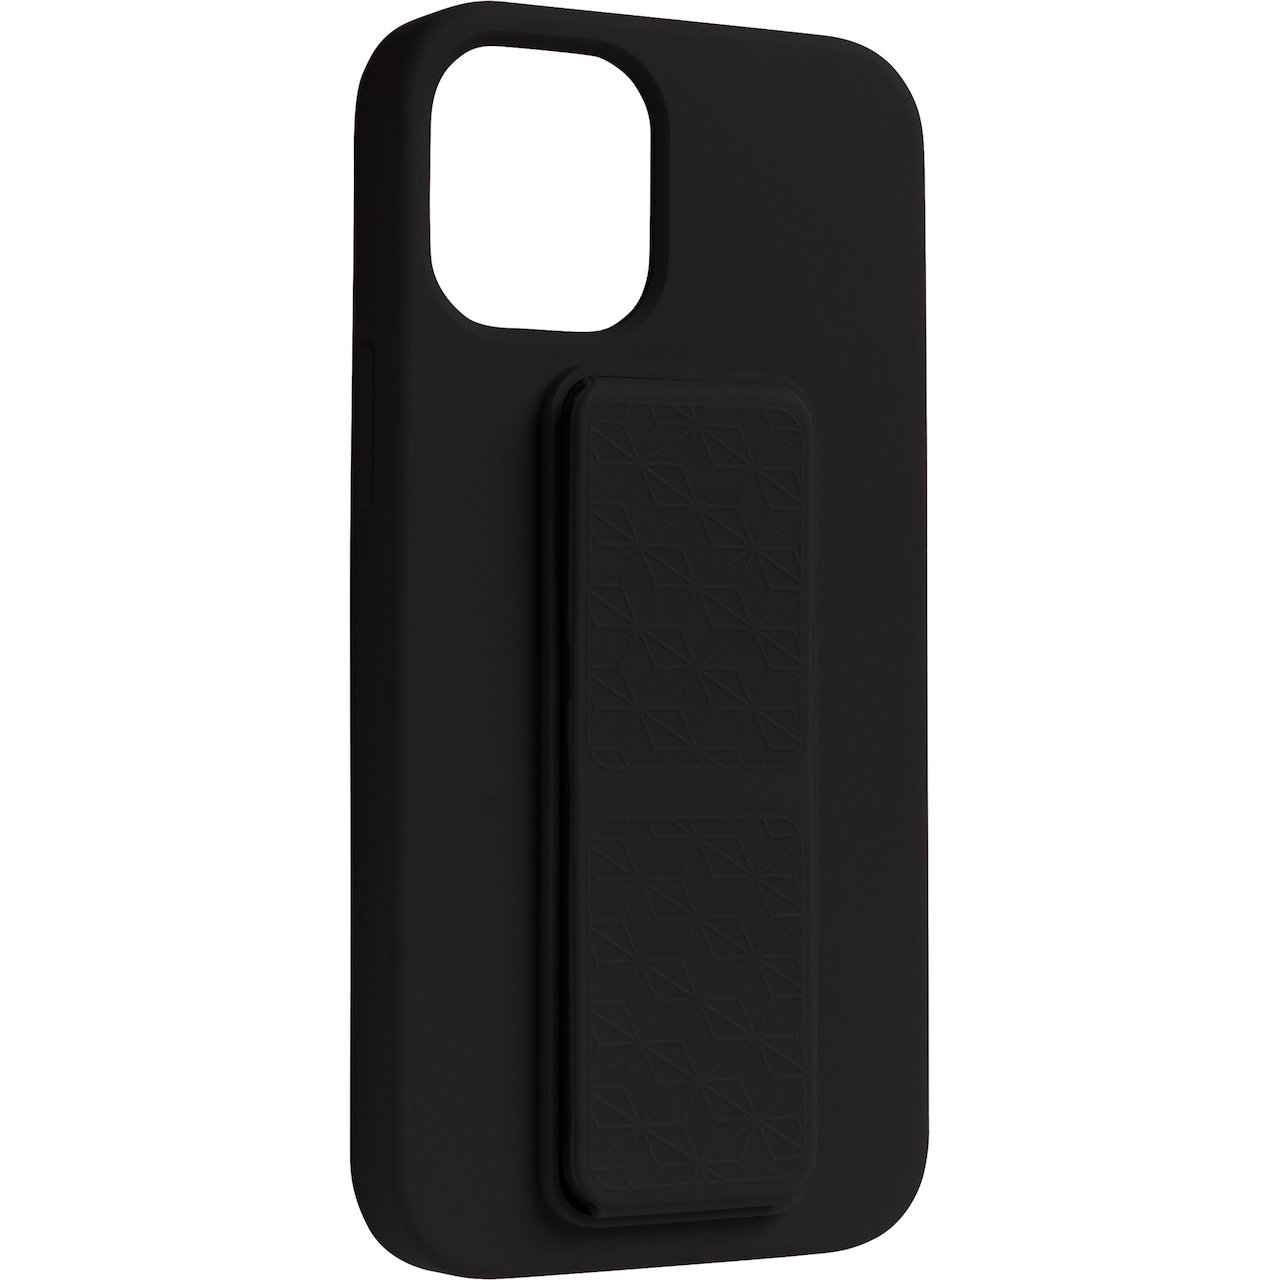 LEKI BYCPH COVER TIL IPHONE 13 GRIP AND STAND SILIKON SORT